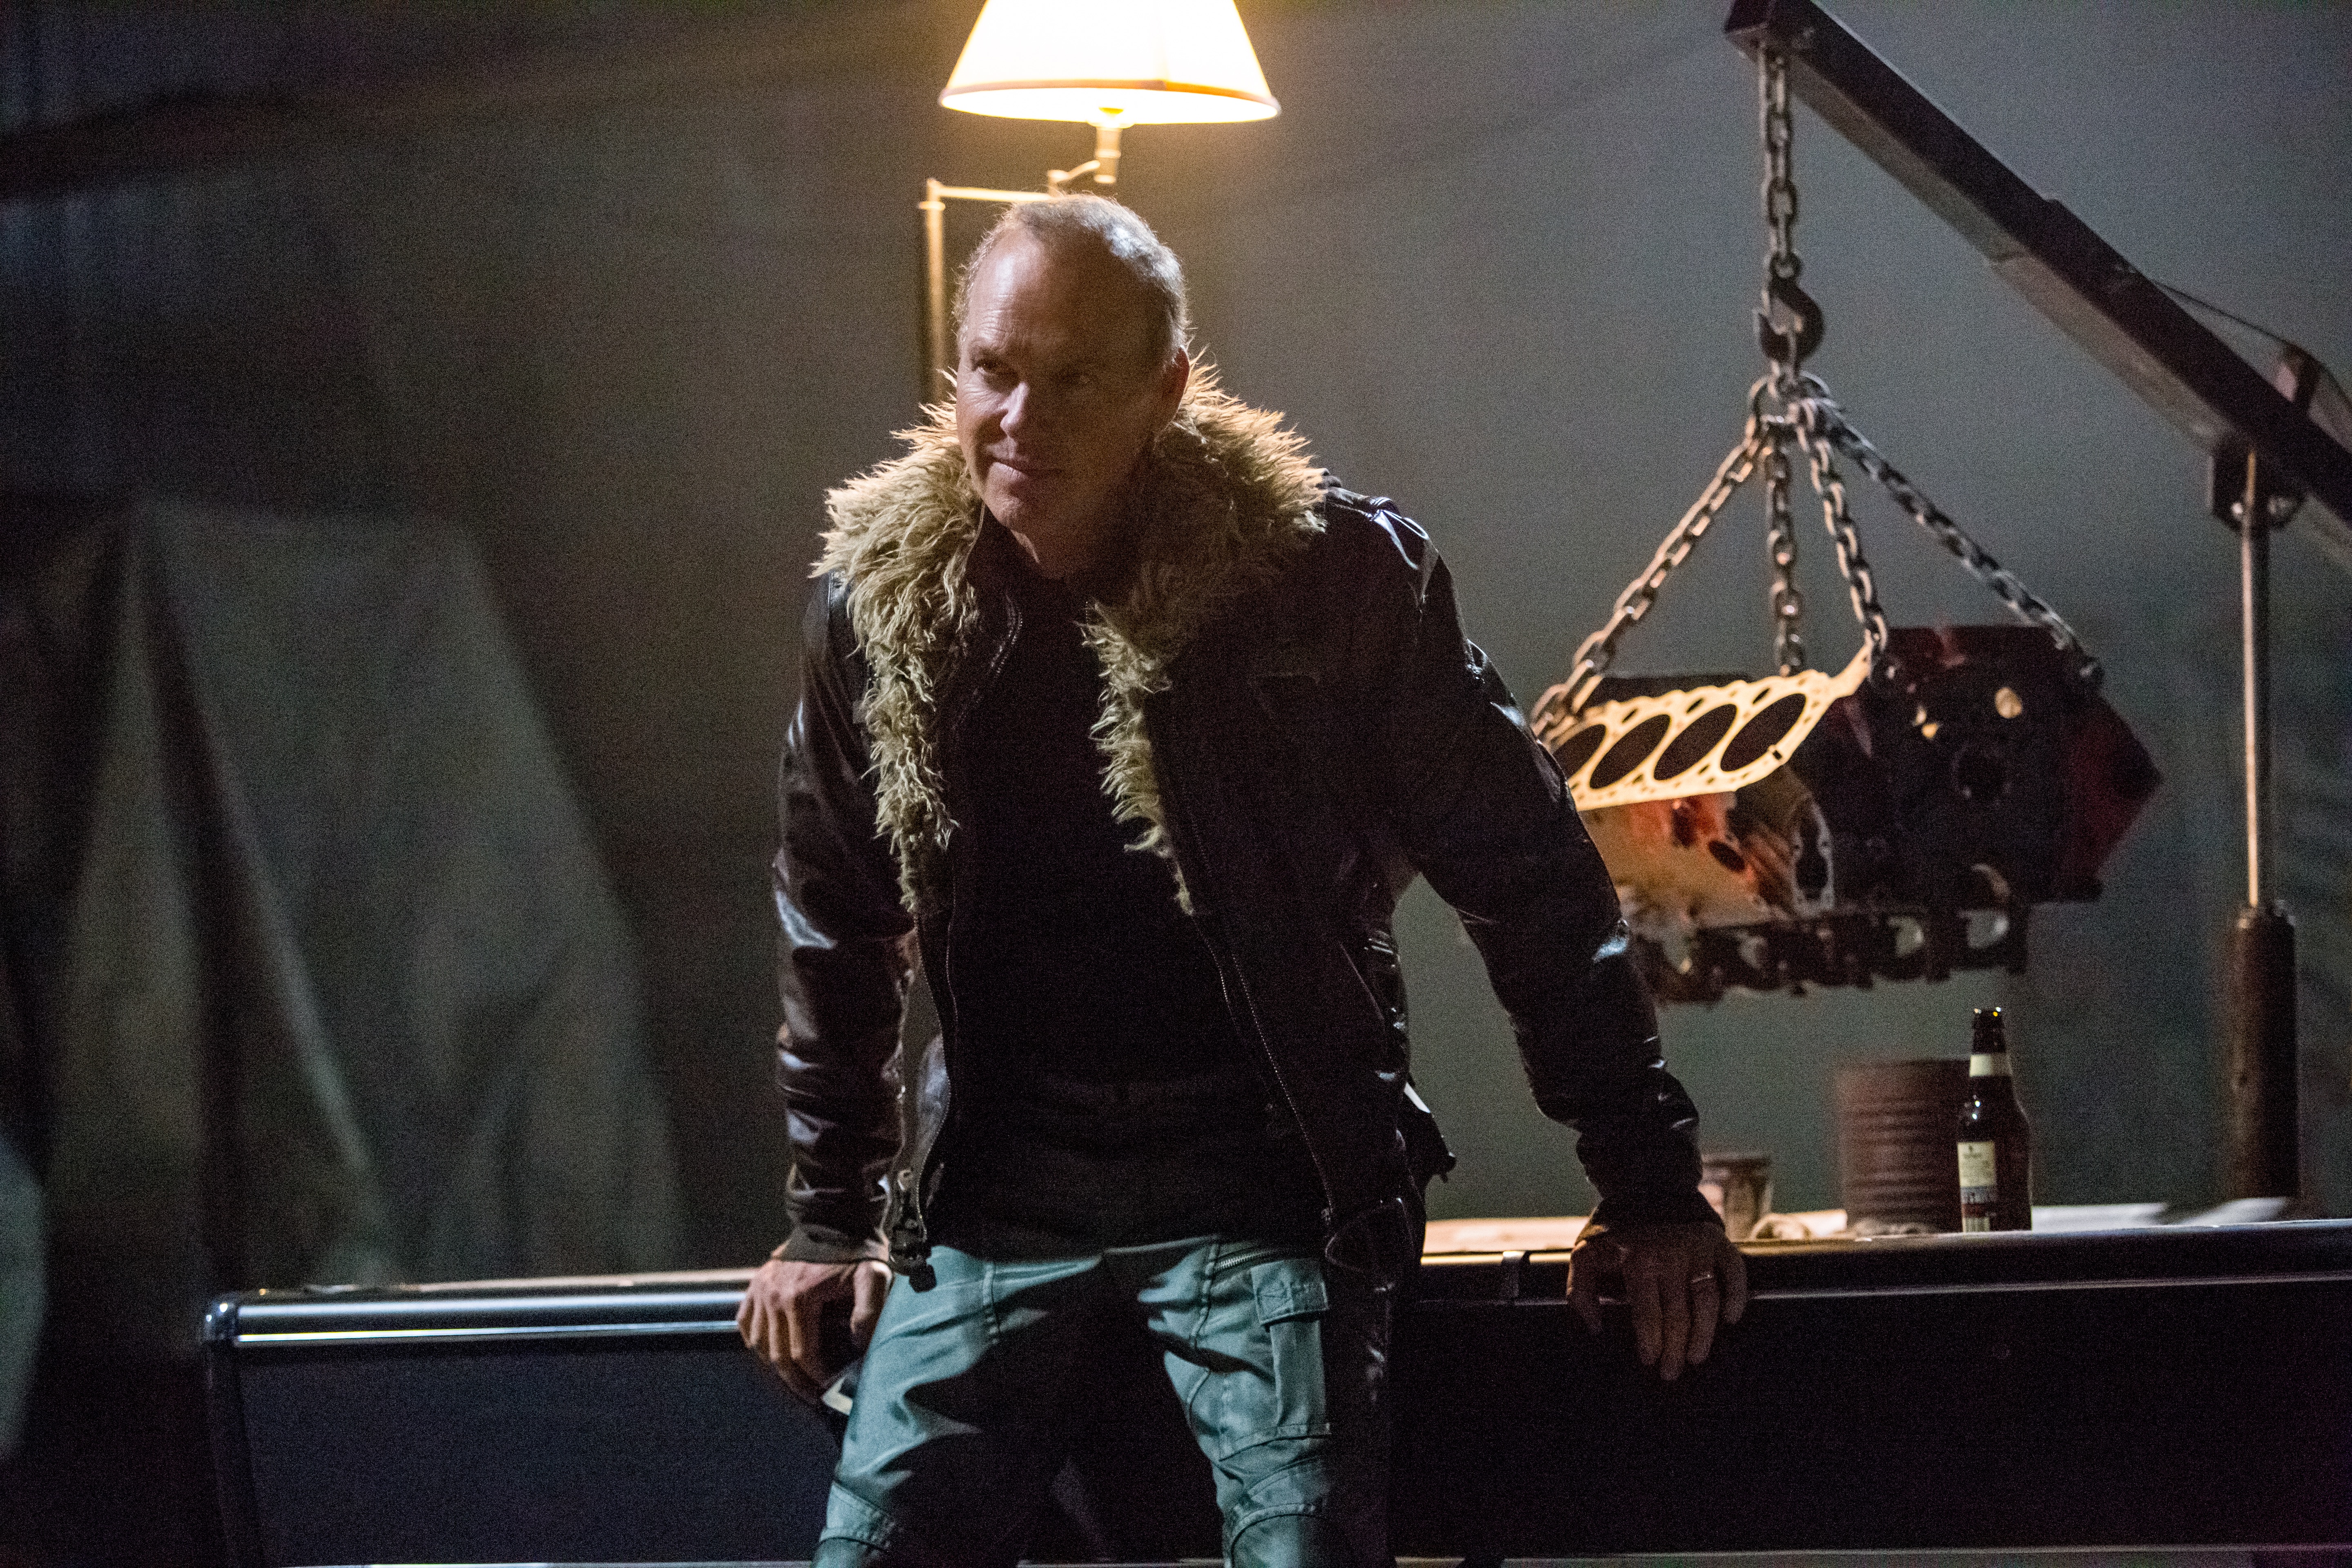 Michael Keaton as Vulture in Spider-Man: Homecoming